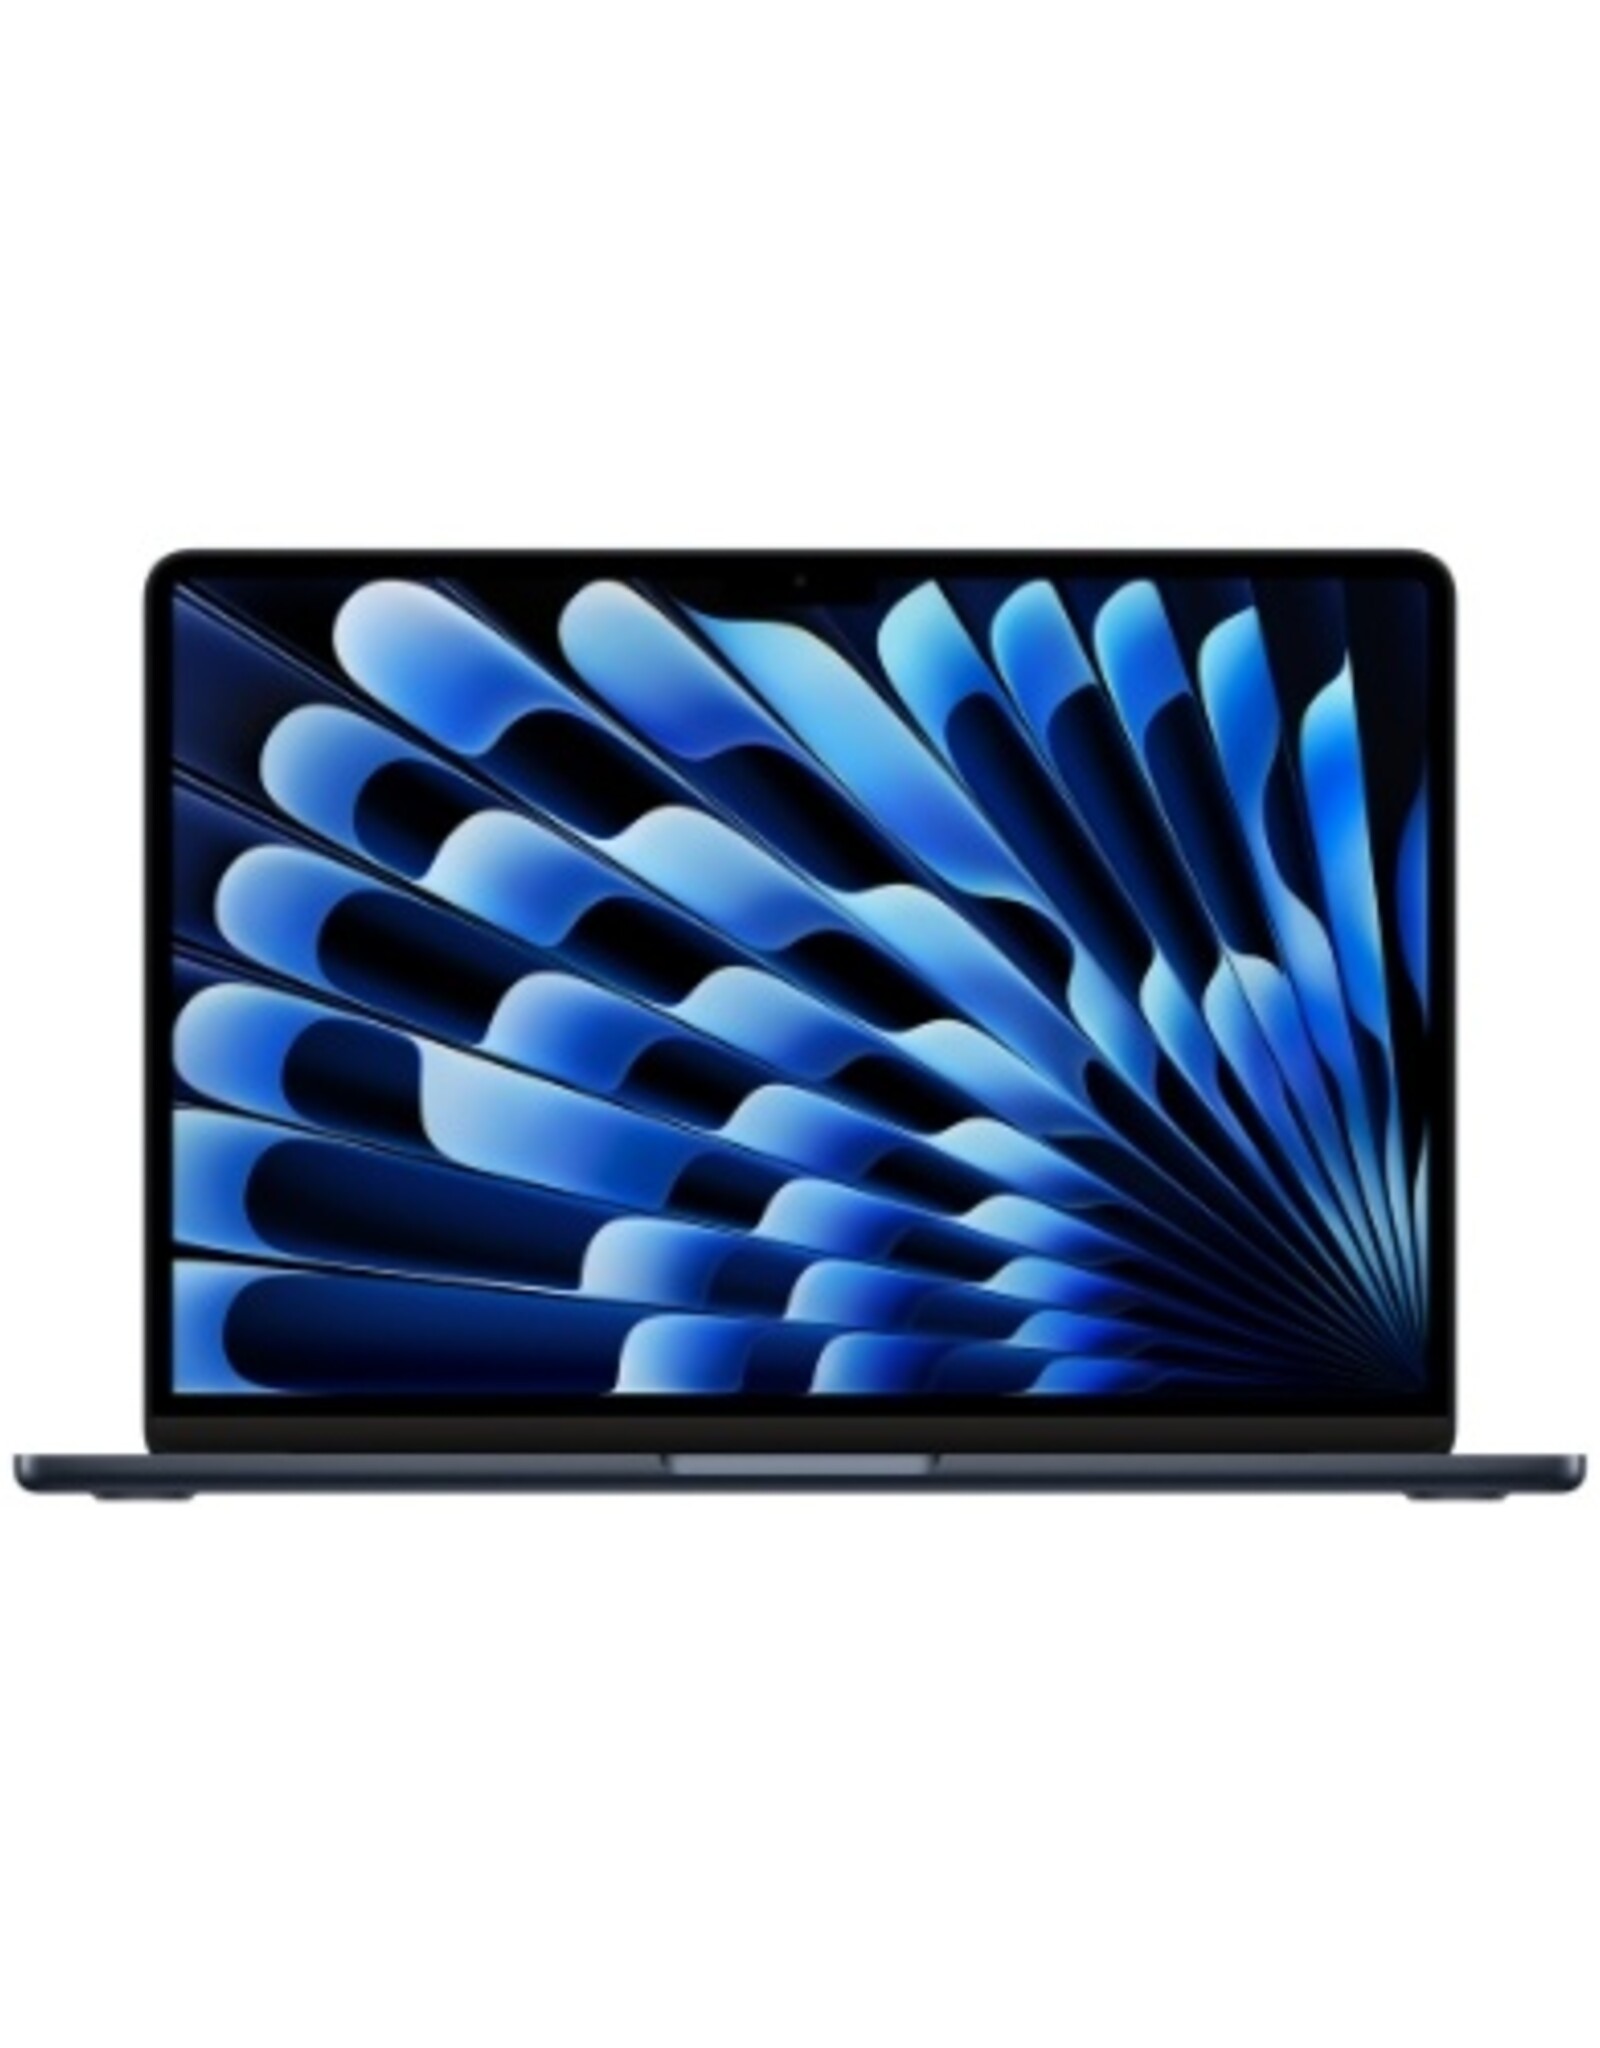 MacBook Air 8ギガ 512gb ssd - PC/タブレット